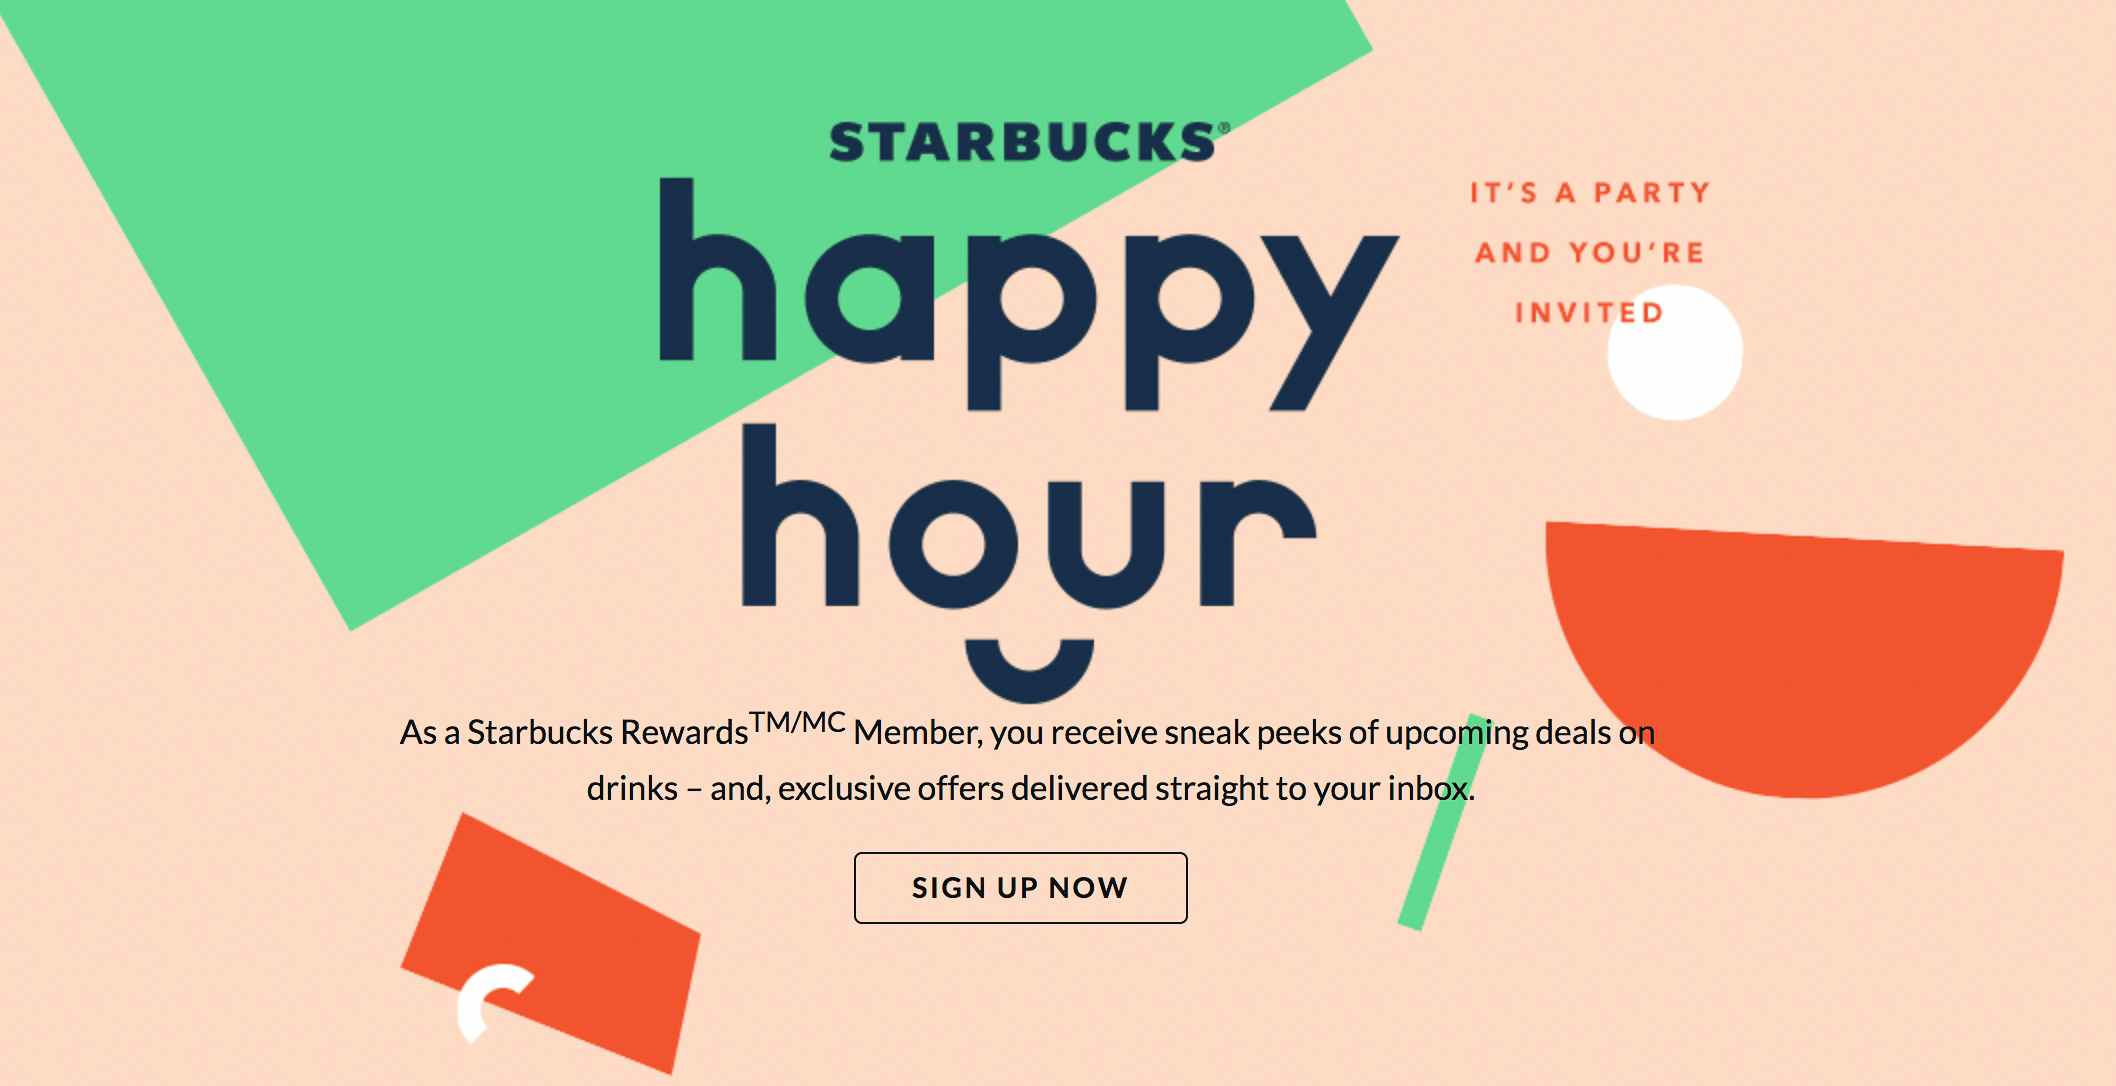 A graphic advertising Starbucks Happy Hour.